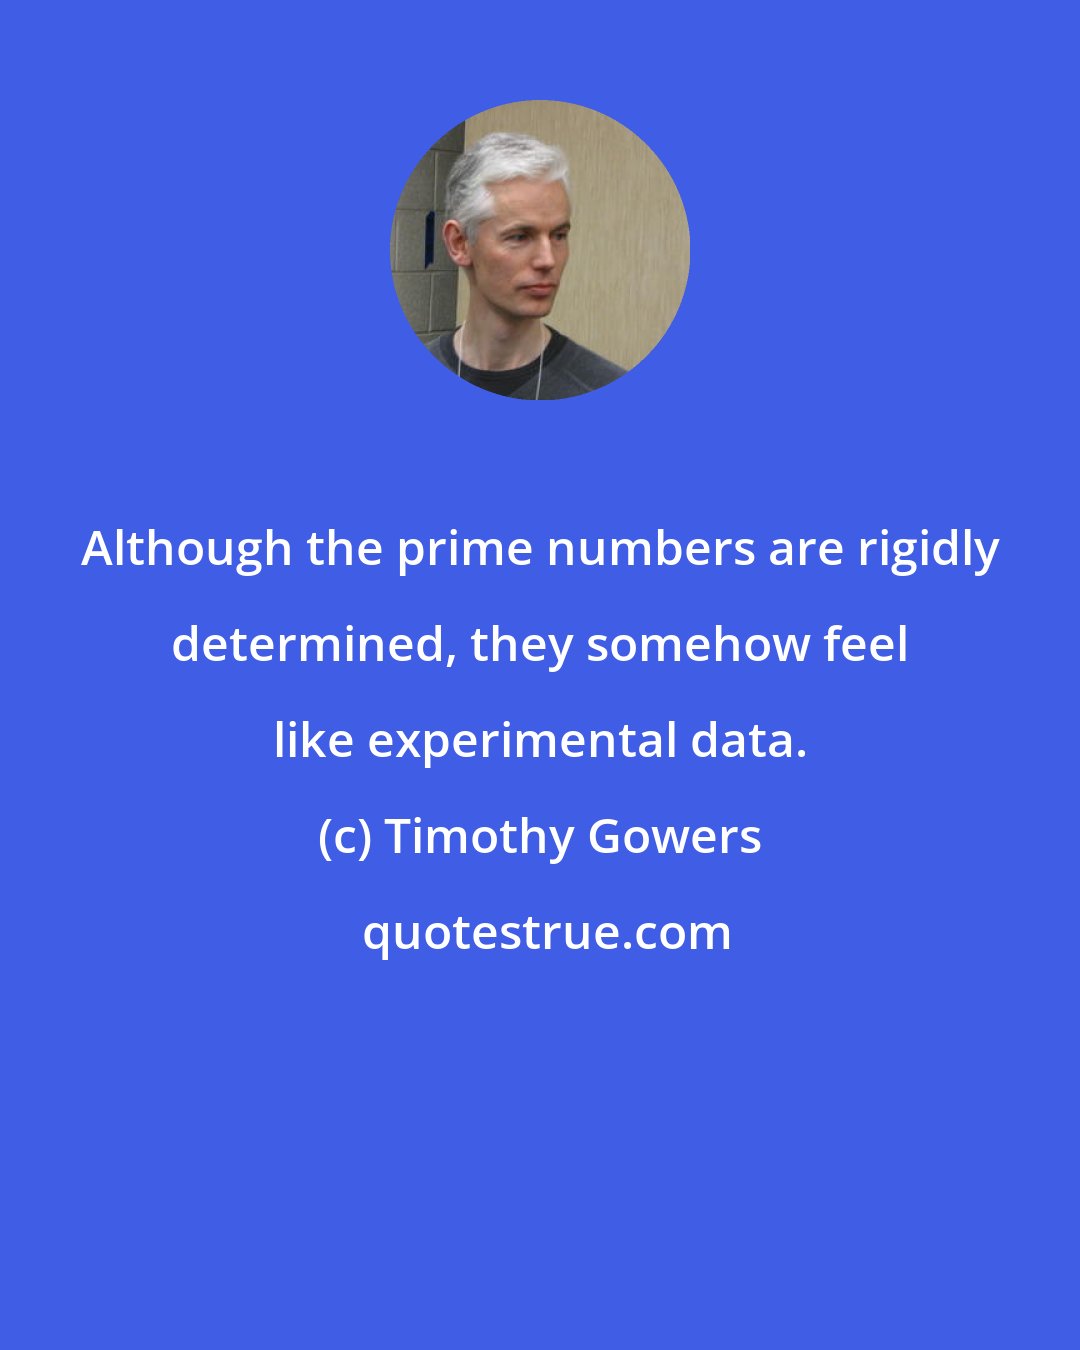 Timothy Gowers: Although the prime numbers are rigidly determined, they somehow feel like experimental data.